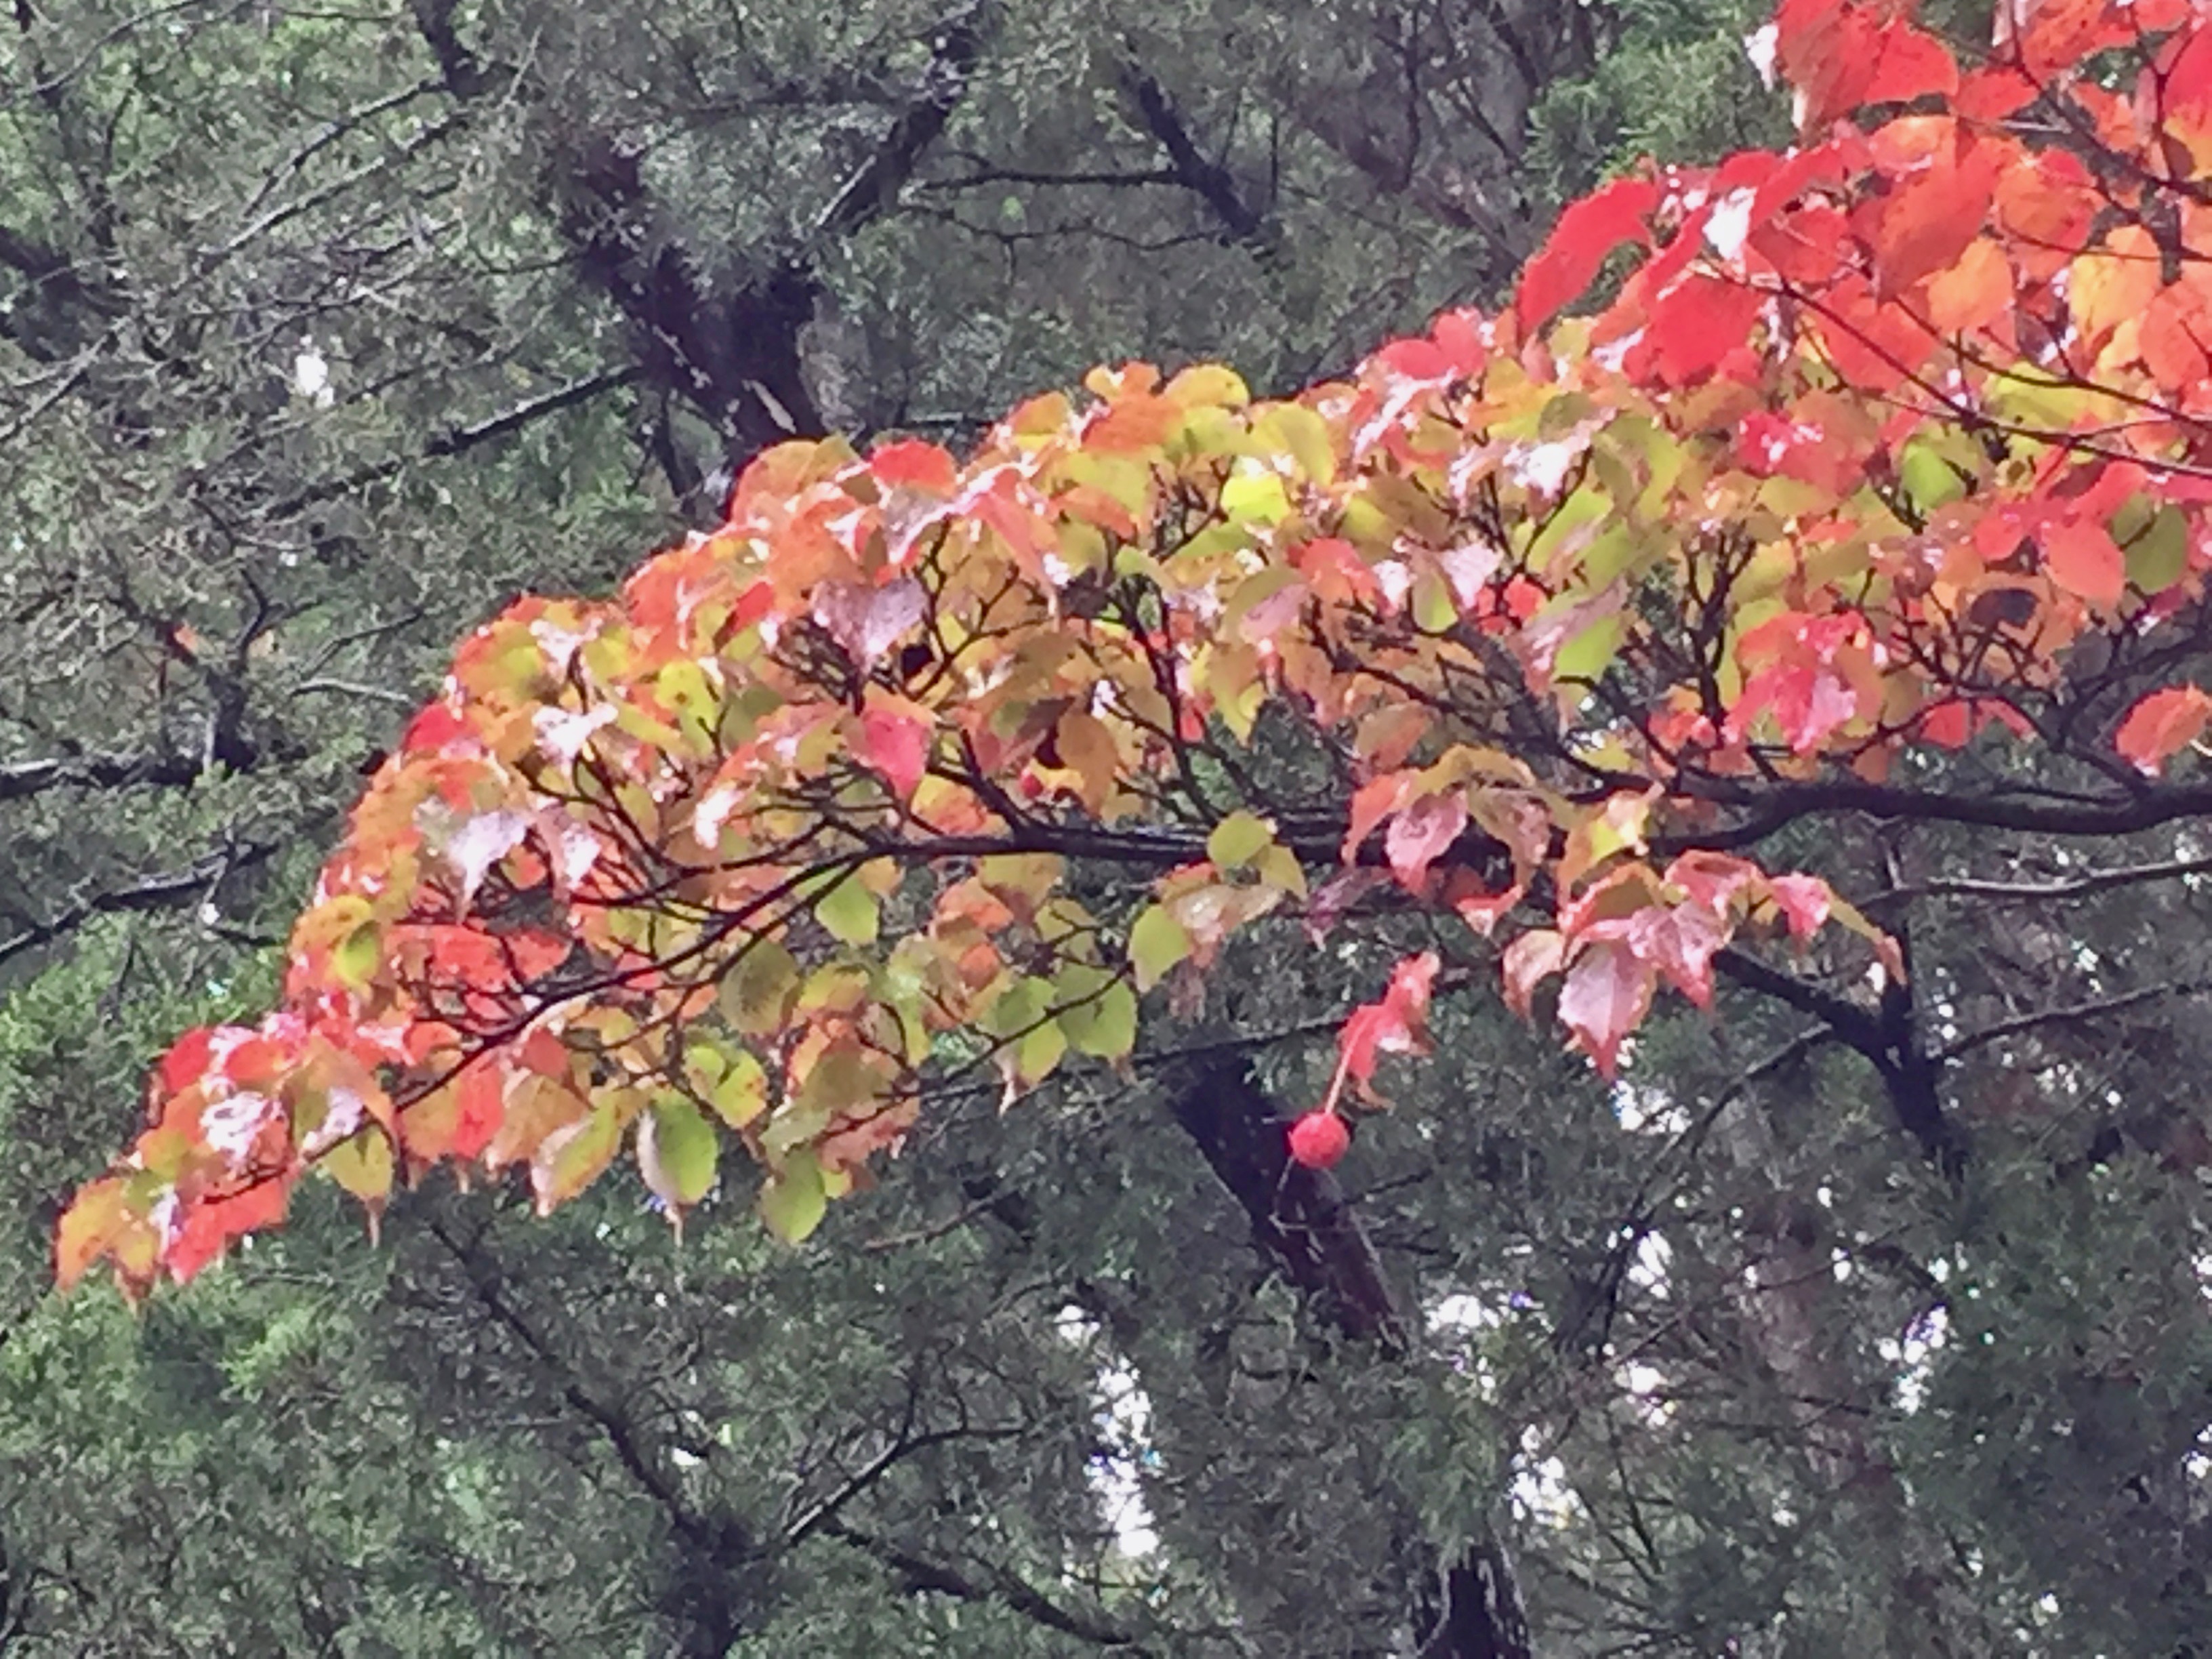 It's the weekend! Number 128, Fall Dogwood Leaves Drenched in Rain